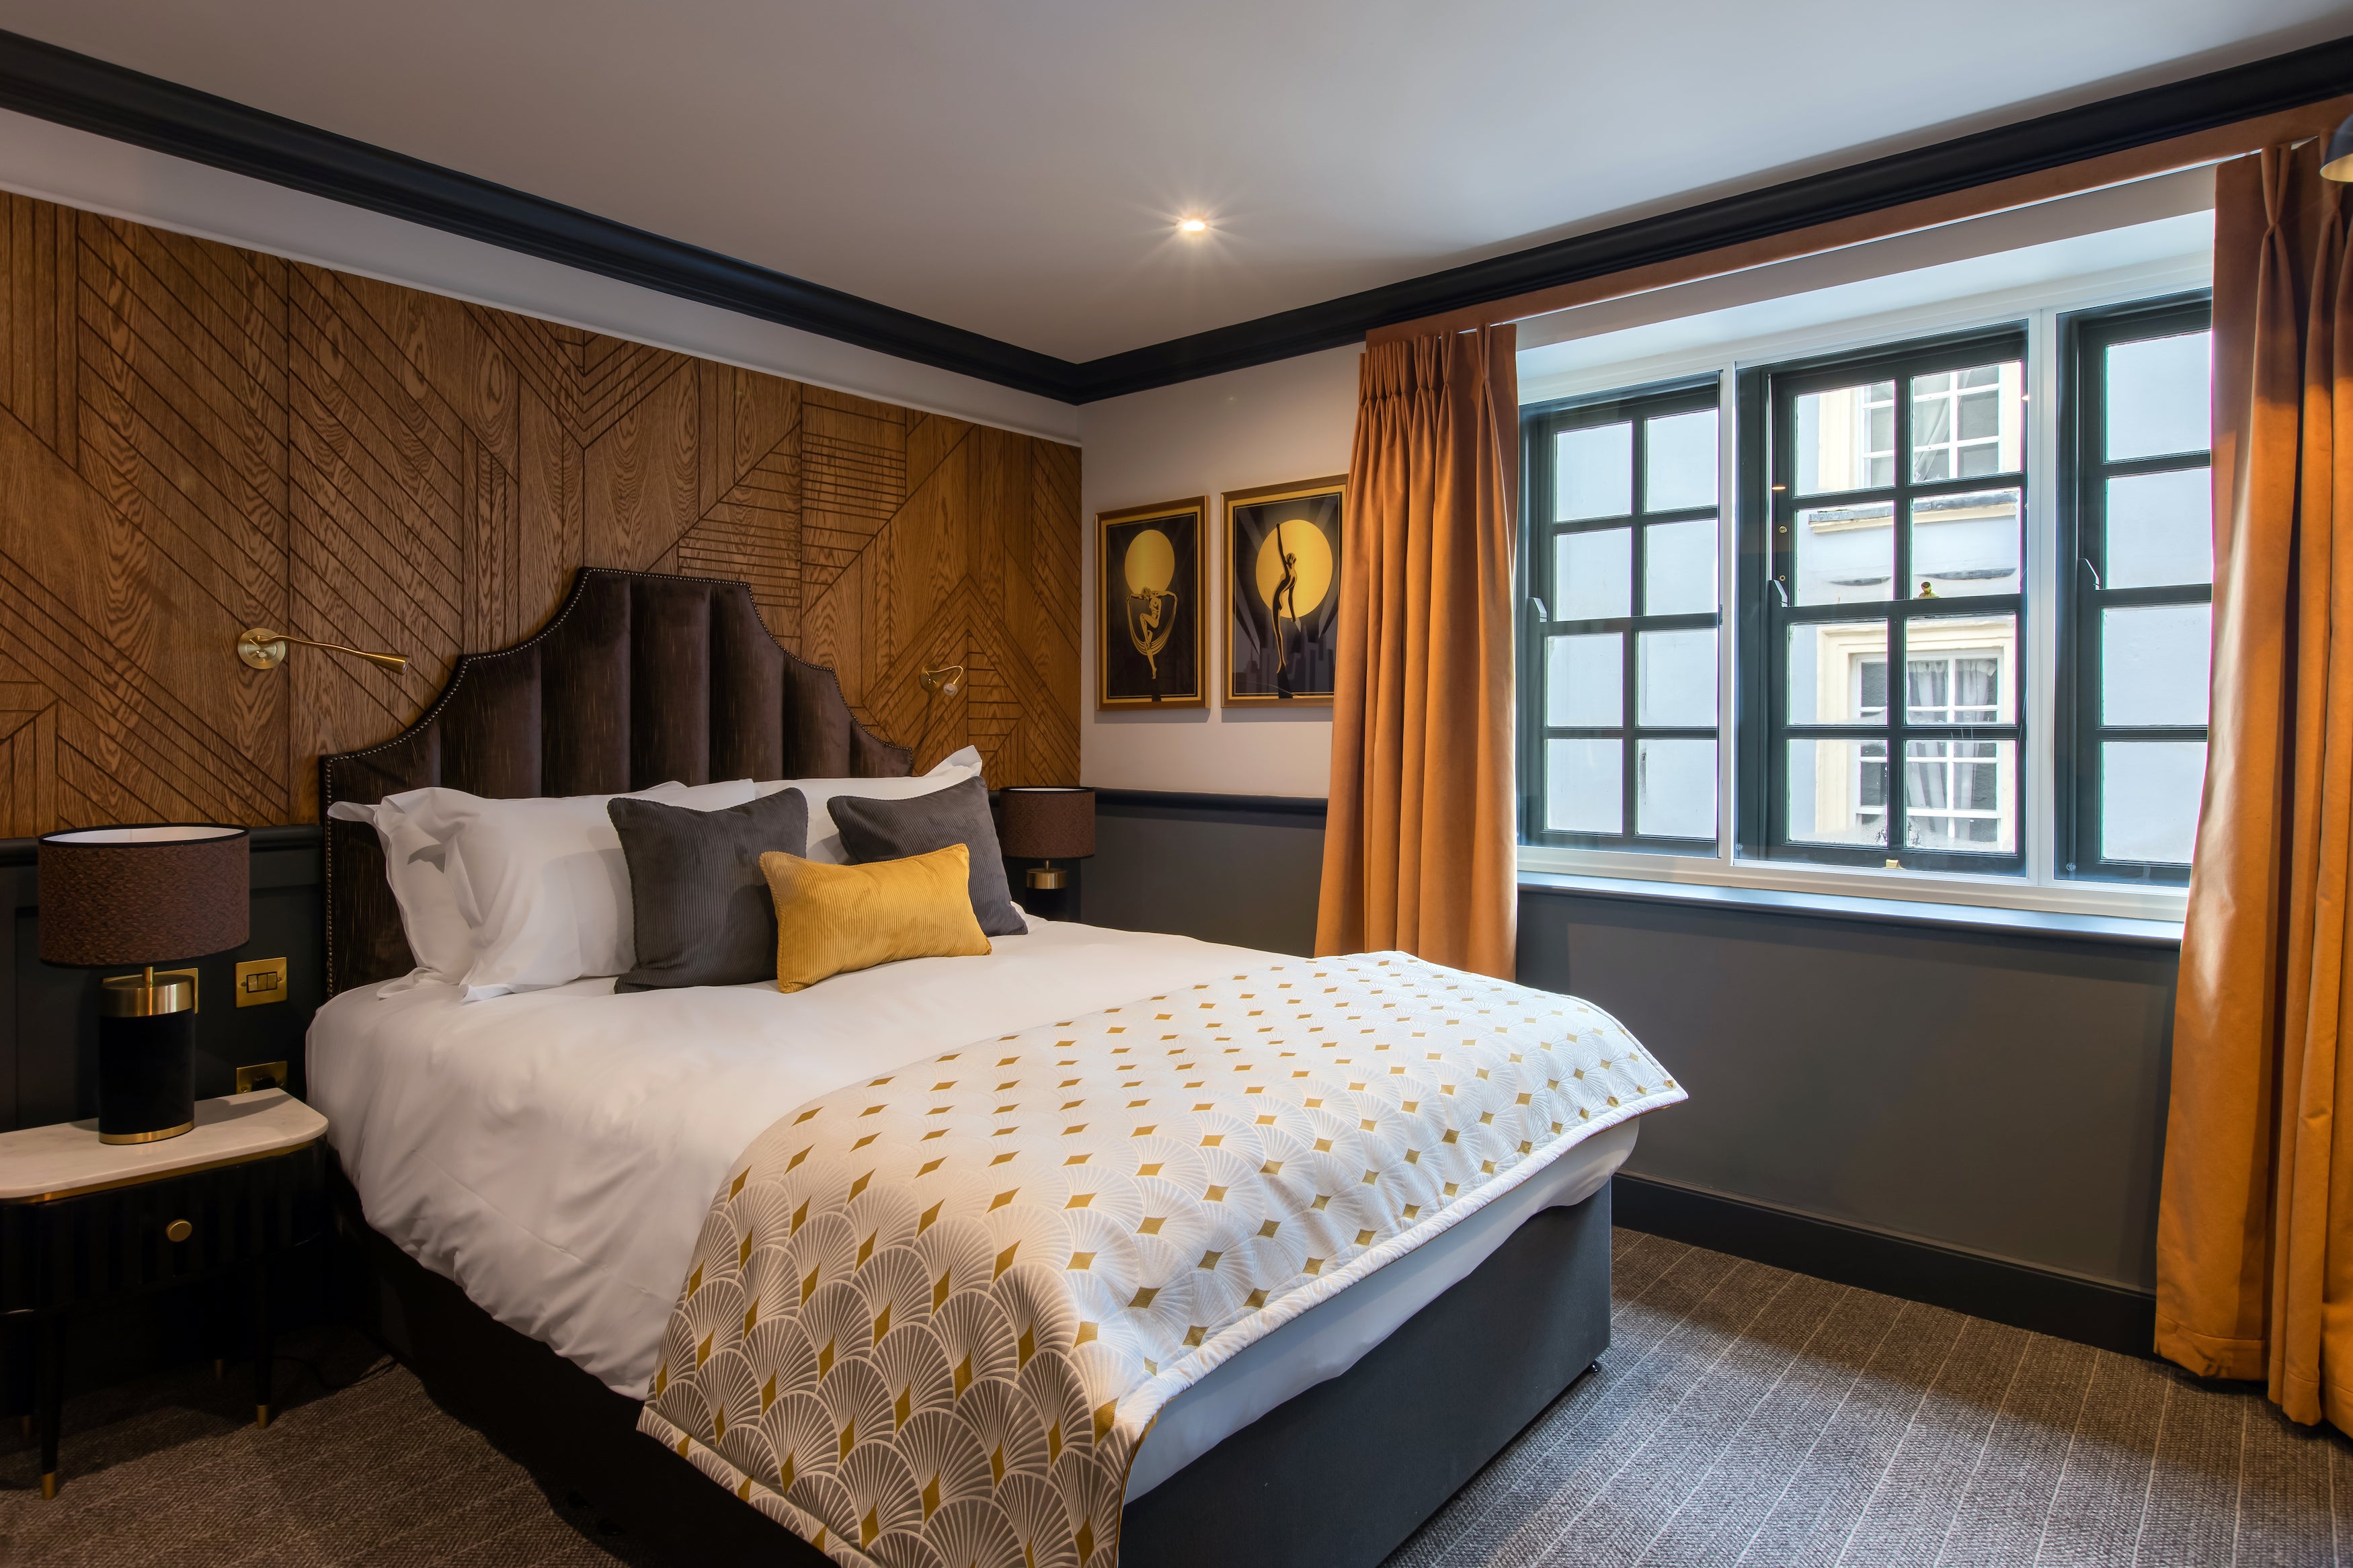 Hort’s Townhouse has had a top to toe revamp